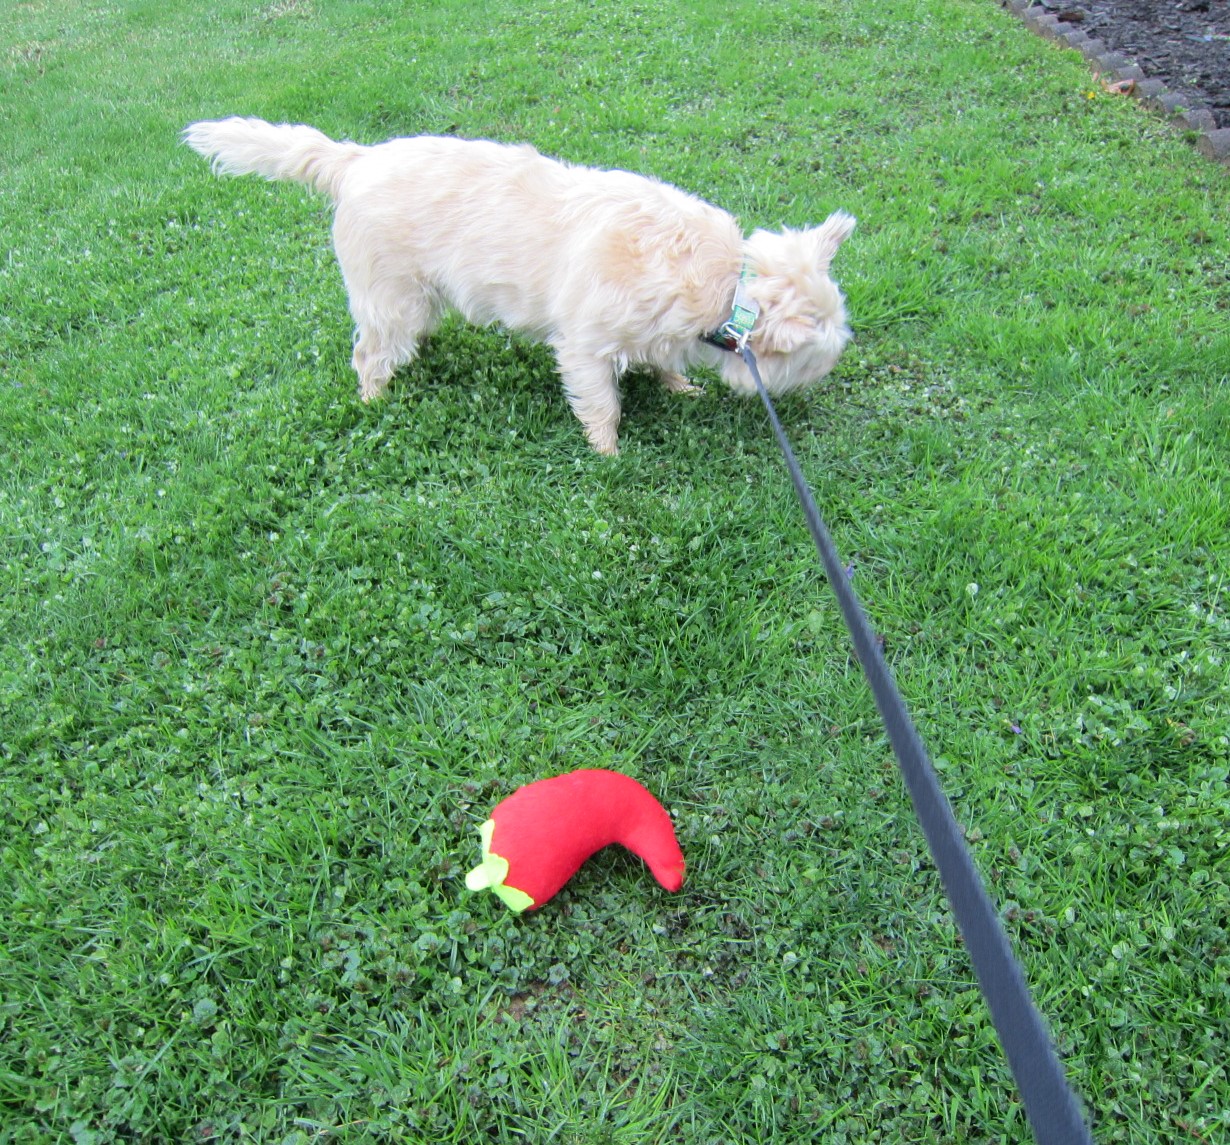 Cairn terrier allows his stuffed chili pepper toy to go pee.